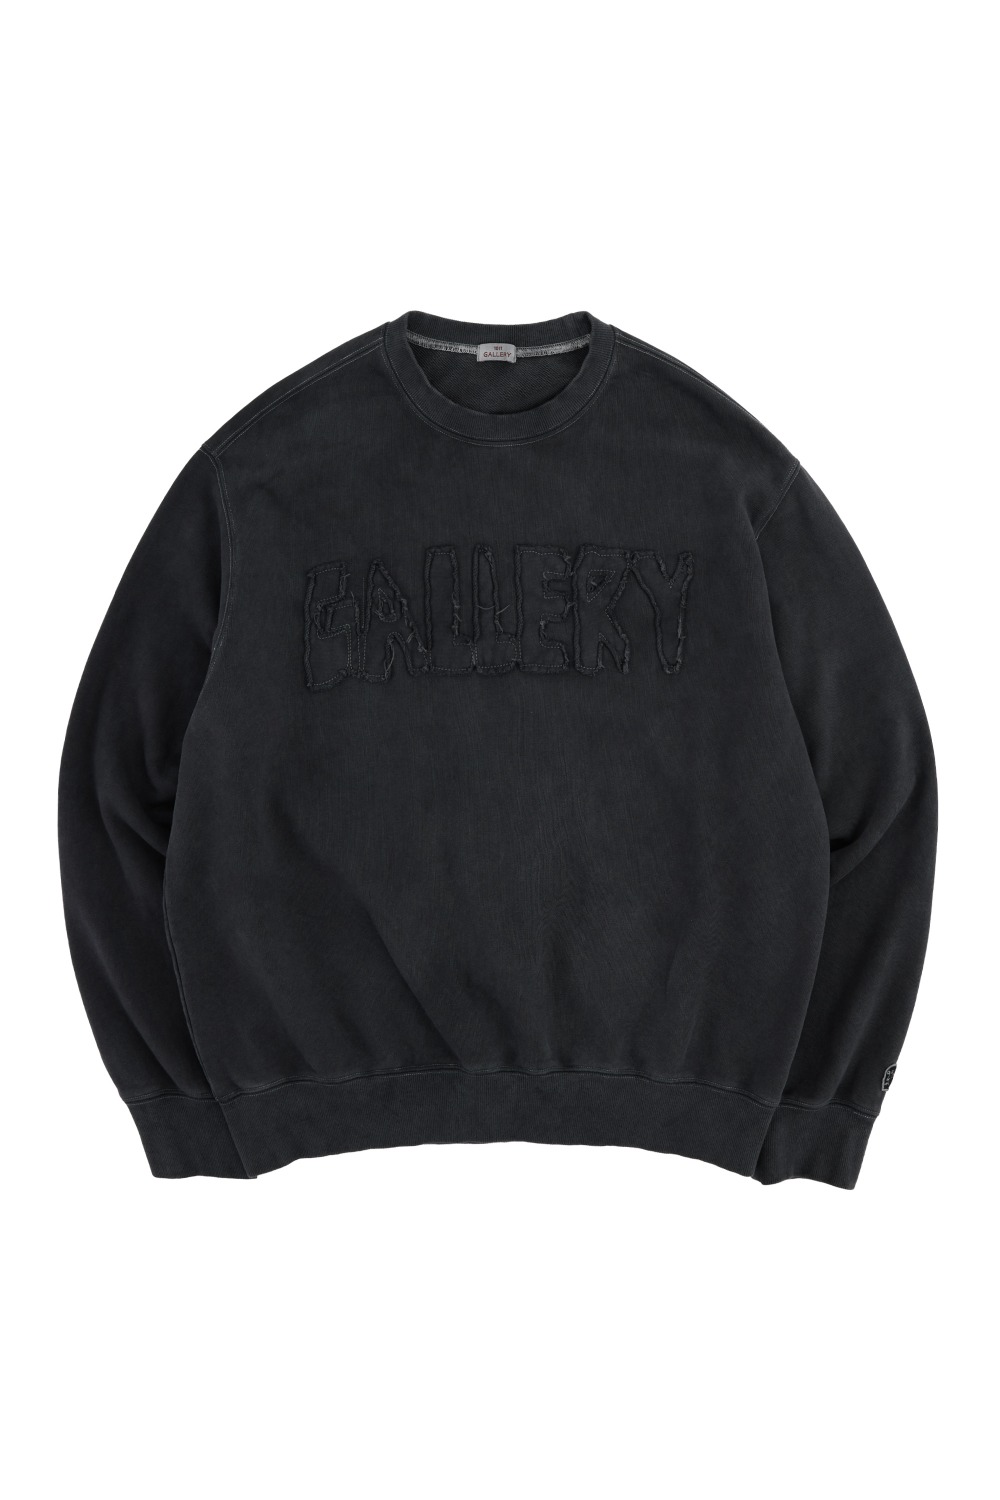 Cut Out Dying Gallery Sweat Shirt - Charcoal Grey